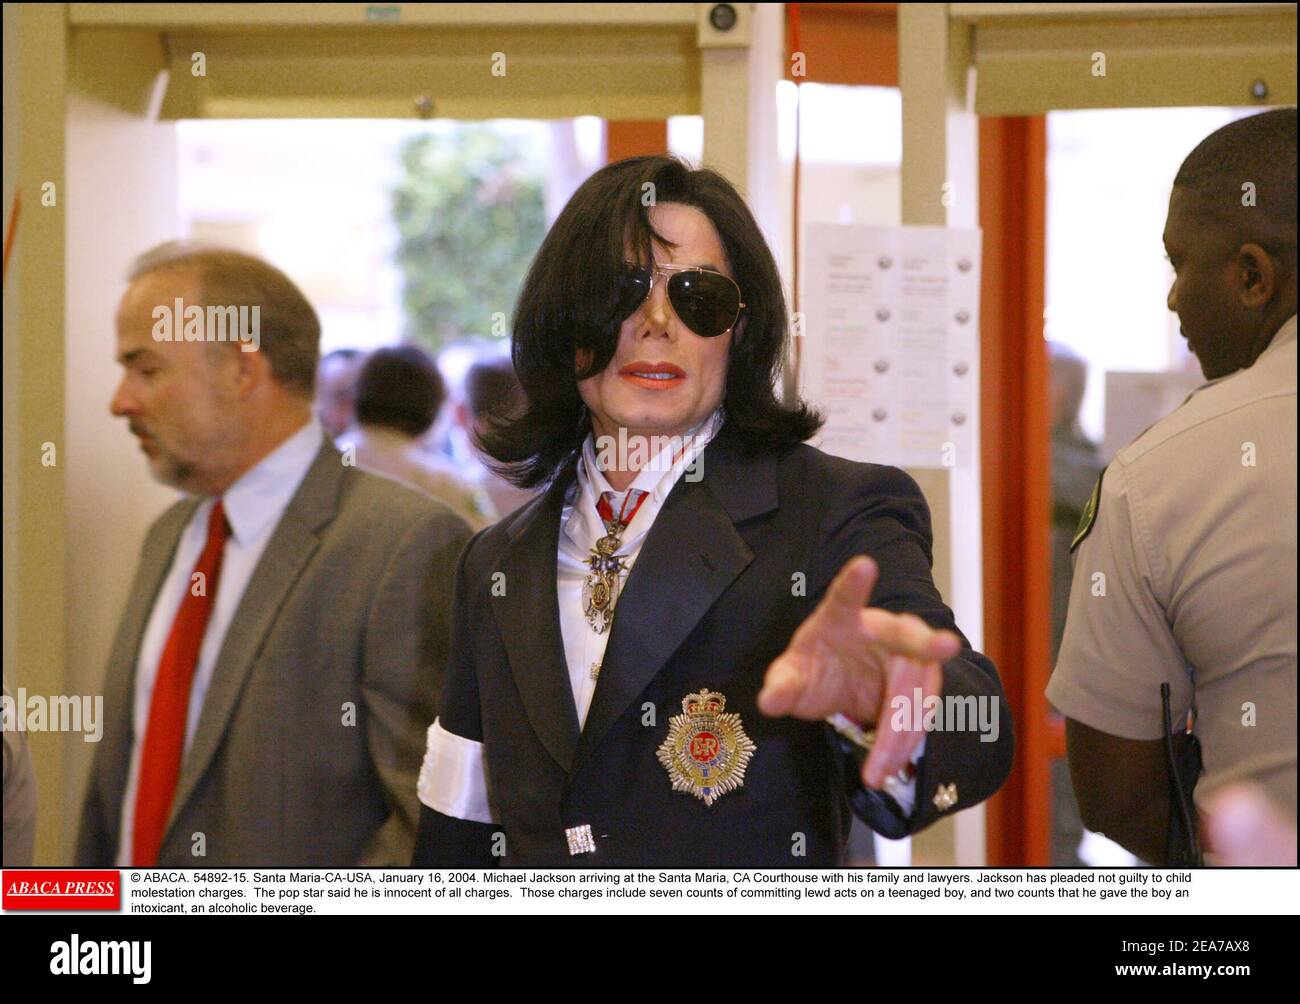 © ABACA. 54892-15. Santa Maria-CA-USA, January 16, 2004. Michael Jackson arriving at the Santa Maria, CA Courthouse with his family and lawyers. Jackson has pleaded not guilty to child molestation charges. The pop star said he is innocent of all charges. Those charges include seven counts of committing lewd acts on a teenaged boy, and two counts that he gave the boy an intoxicant, an alcoholic beverage. Stock Photo